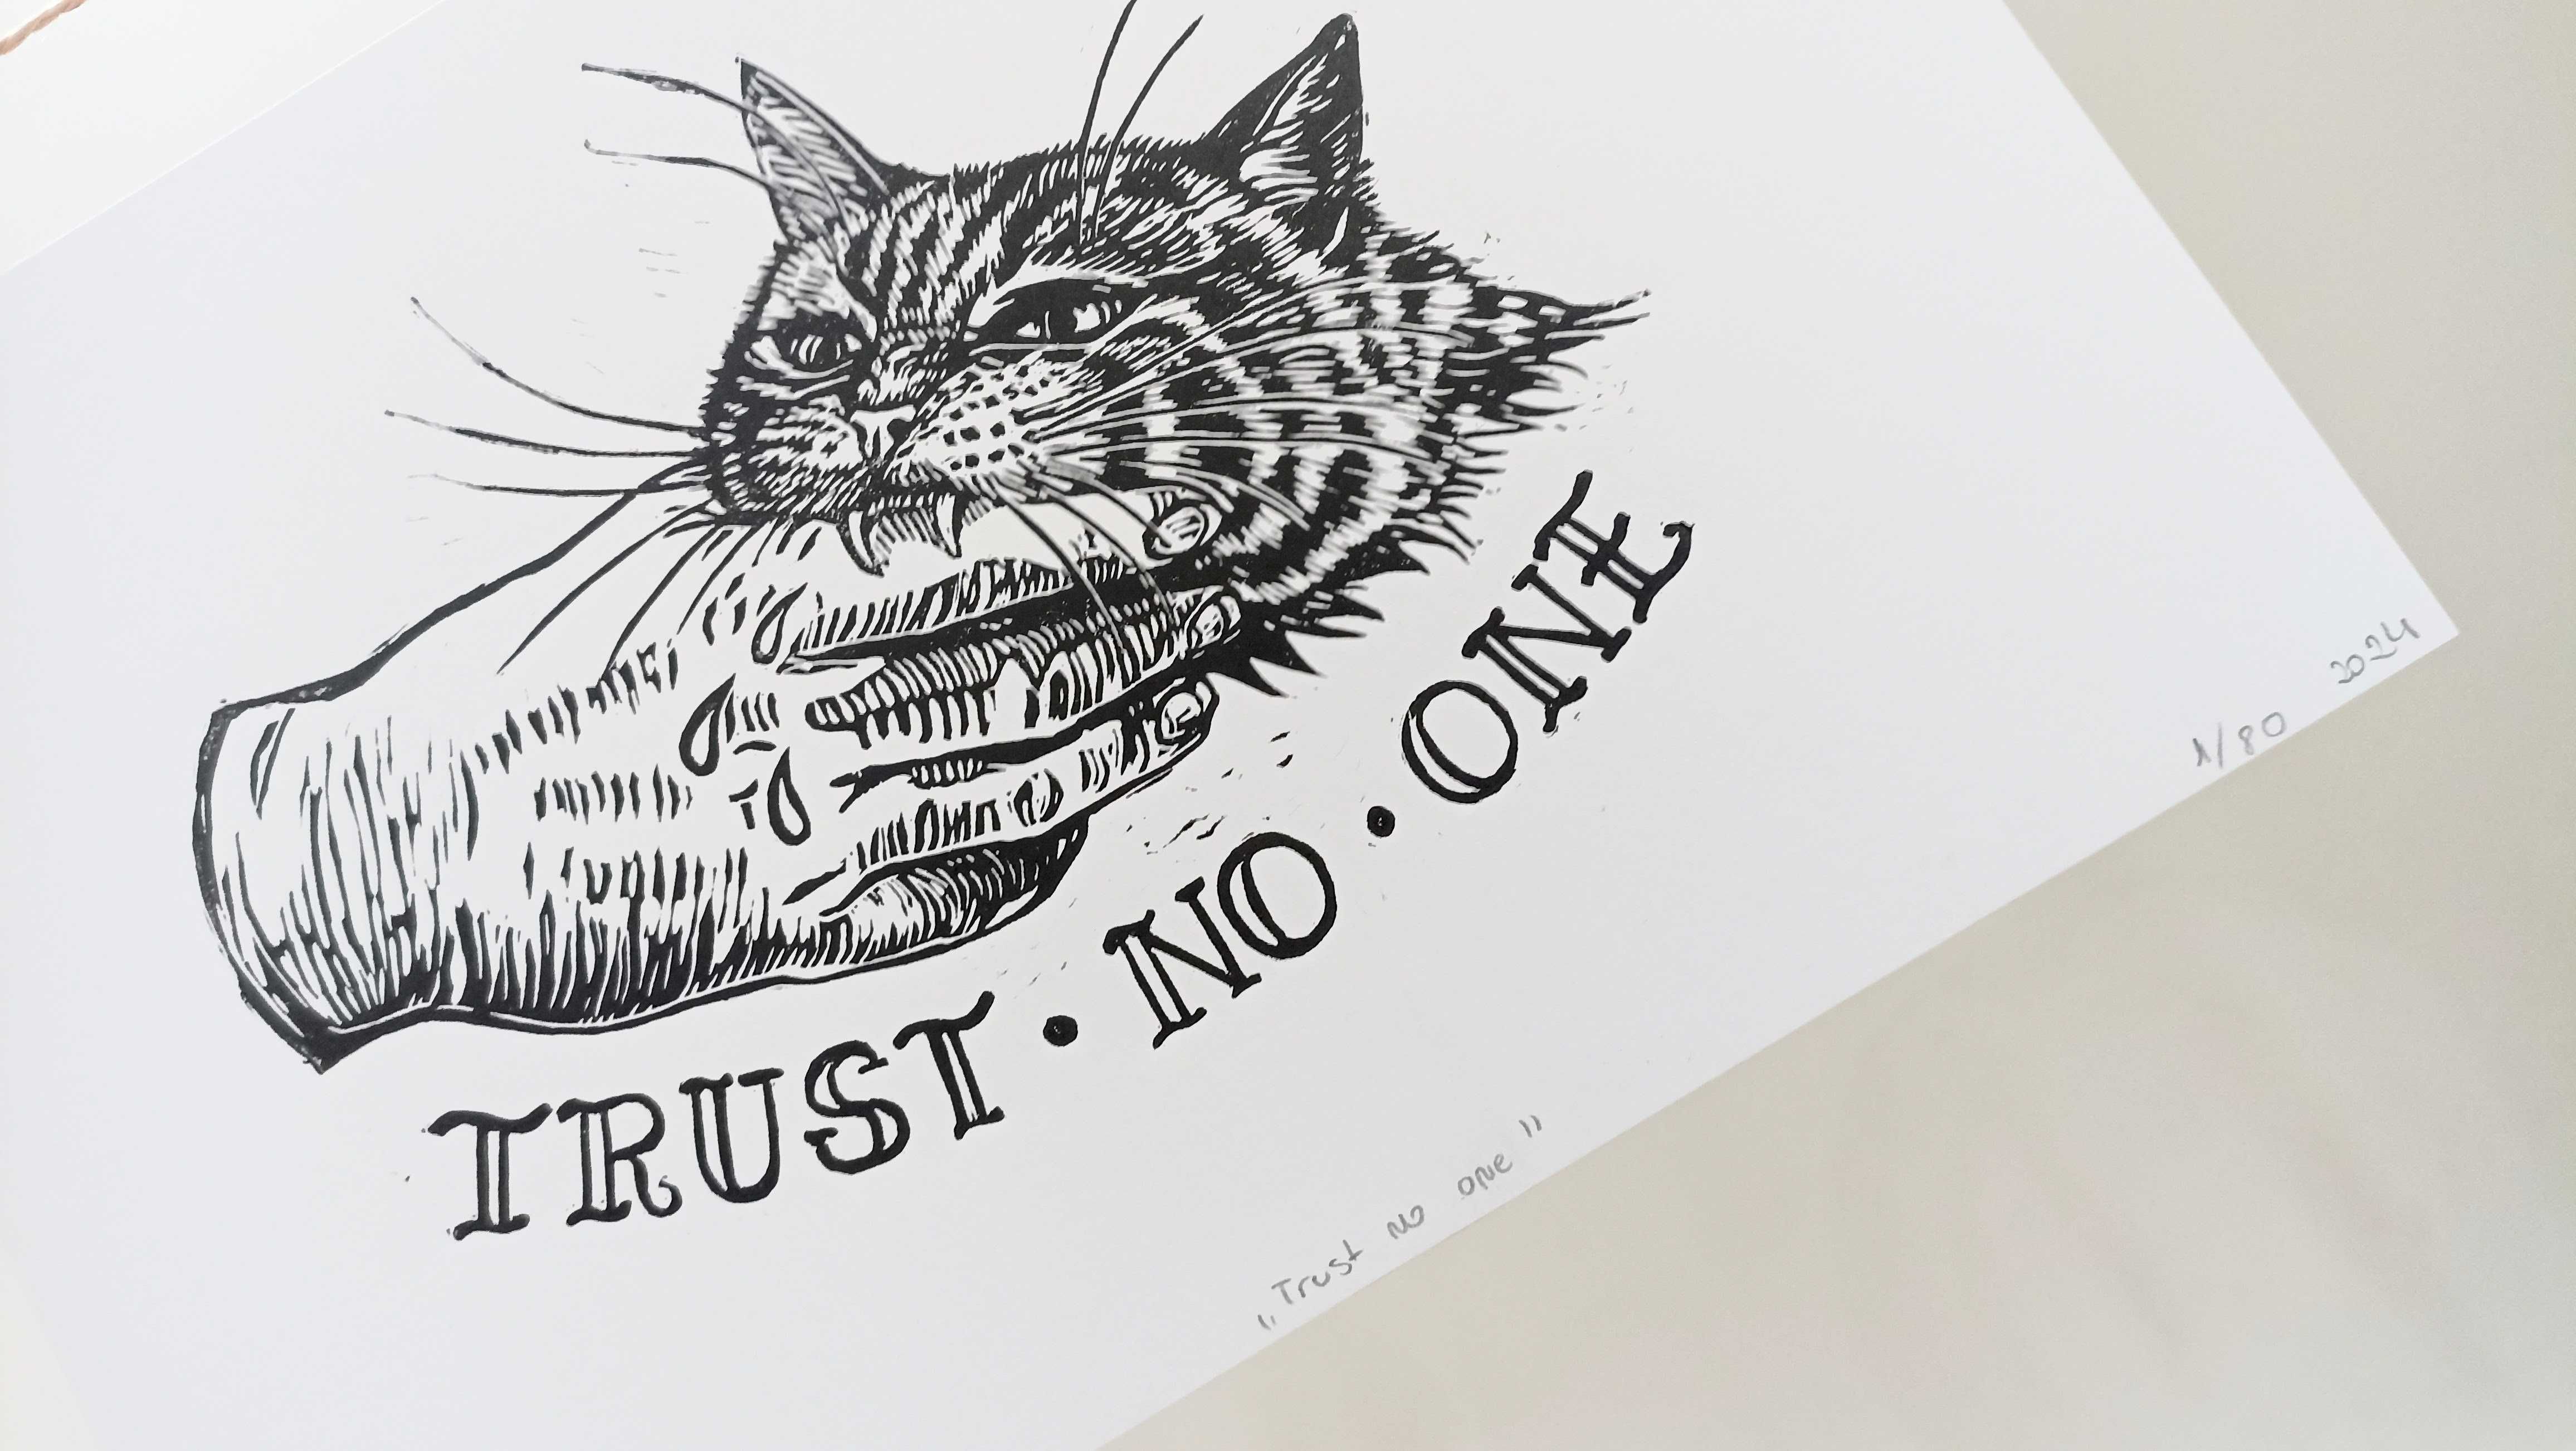 Linoryt "Trust no one", A4